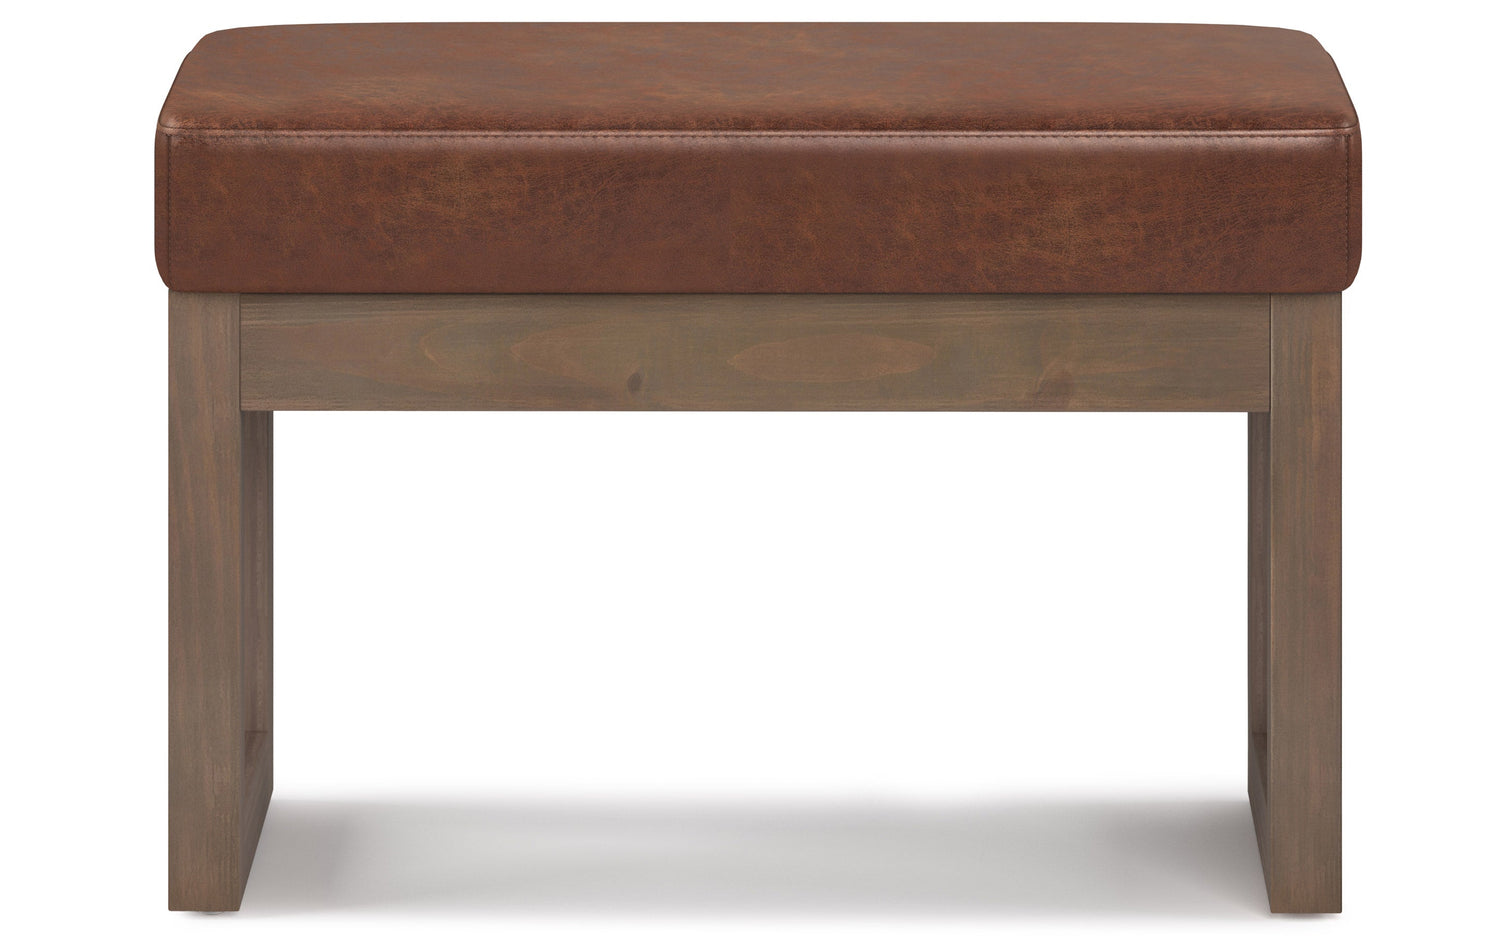 Distressed Saddle Brown Distressed Vegan Leather | Milltown Footstool Small Ottoman Bench